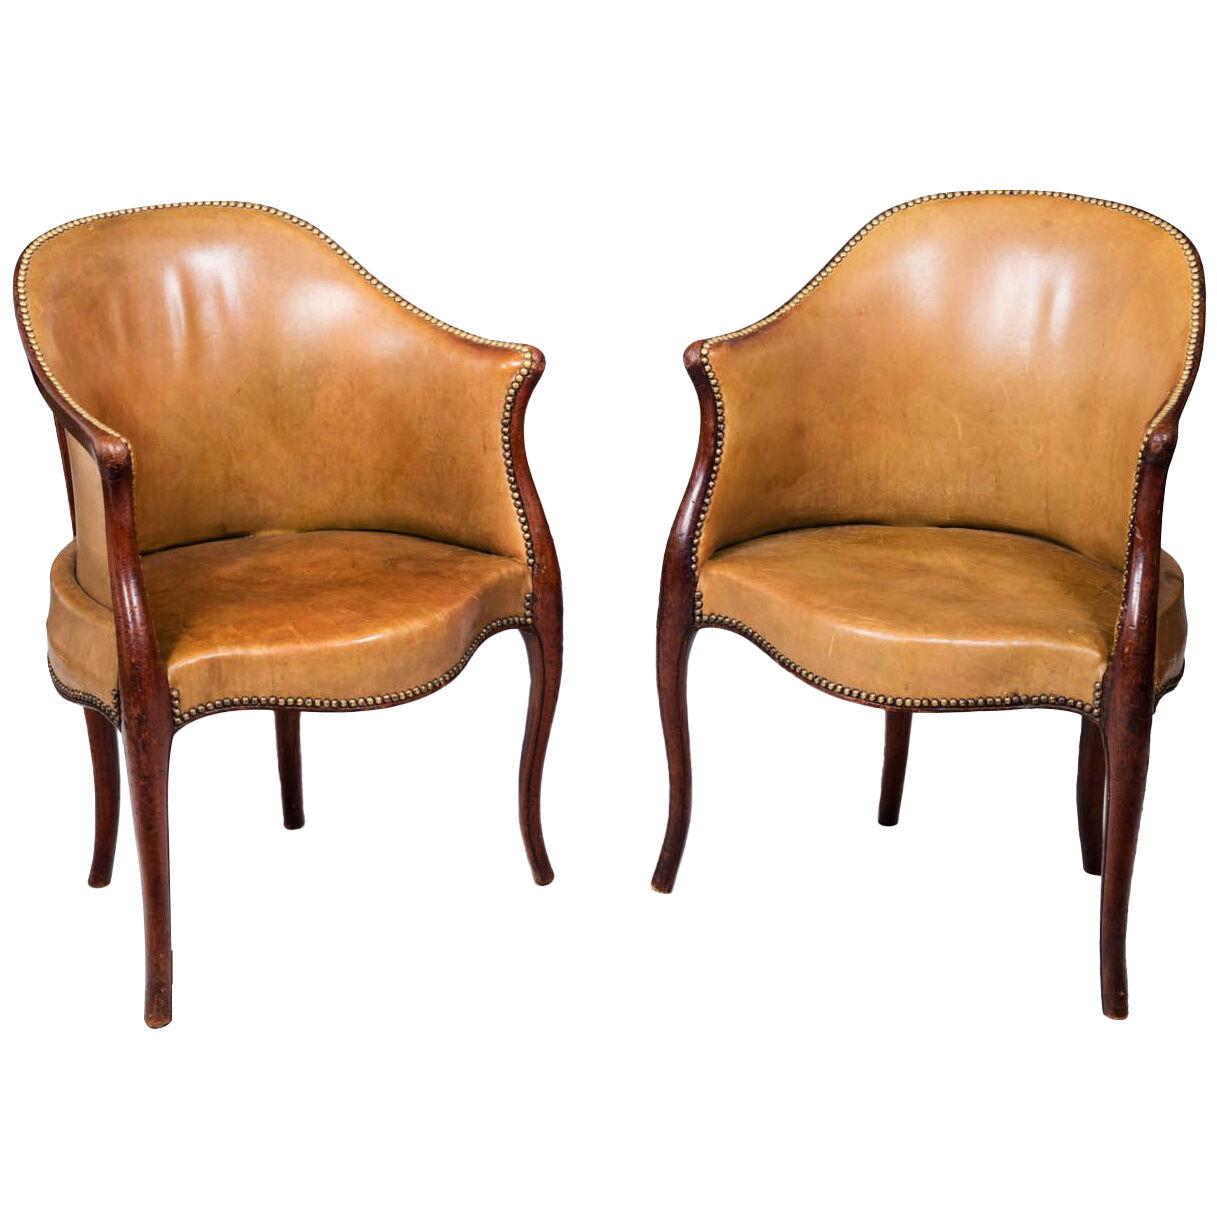 Late 18th Century Pair Tub Library Armchairs